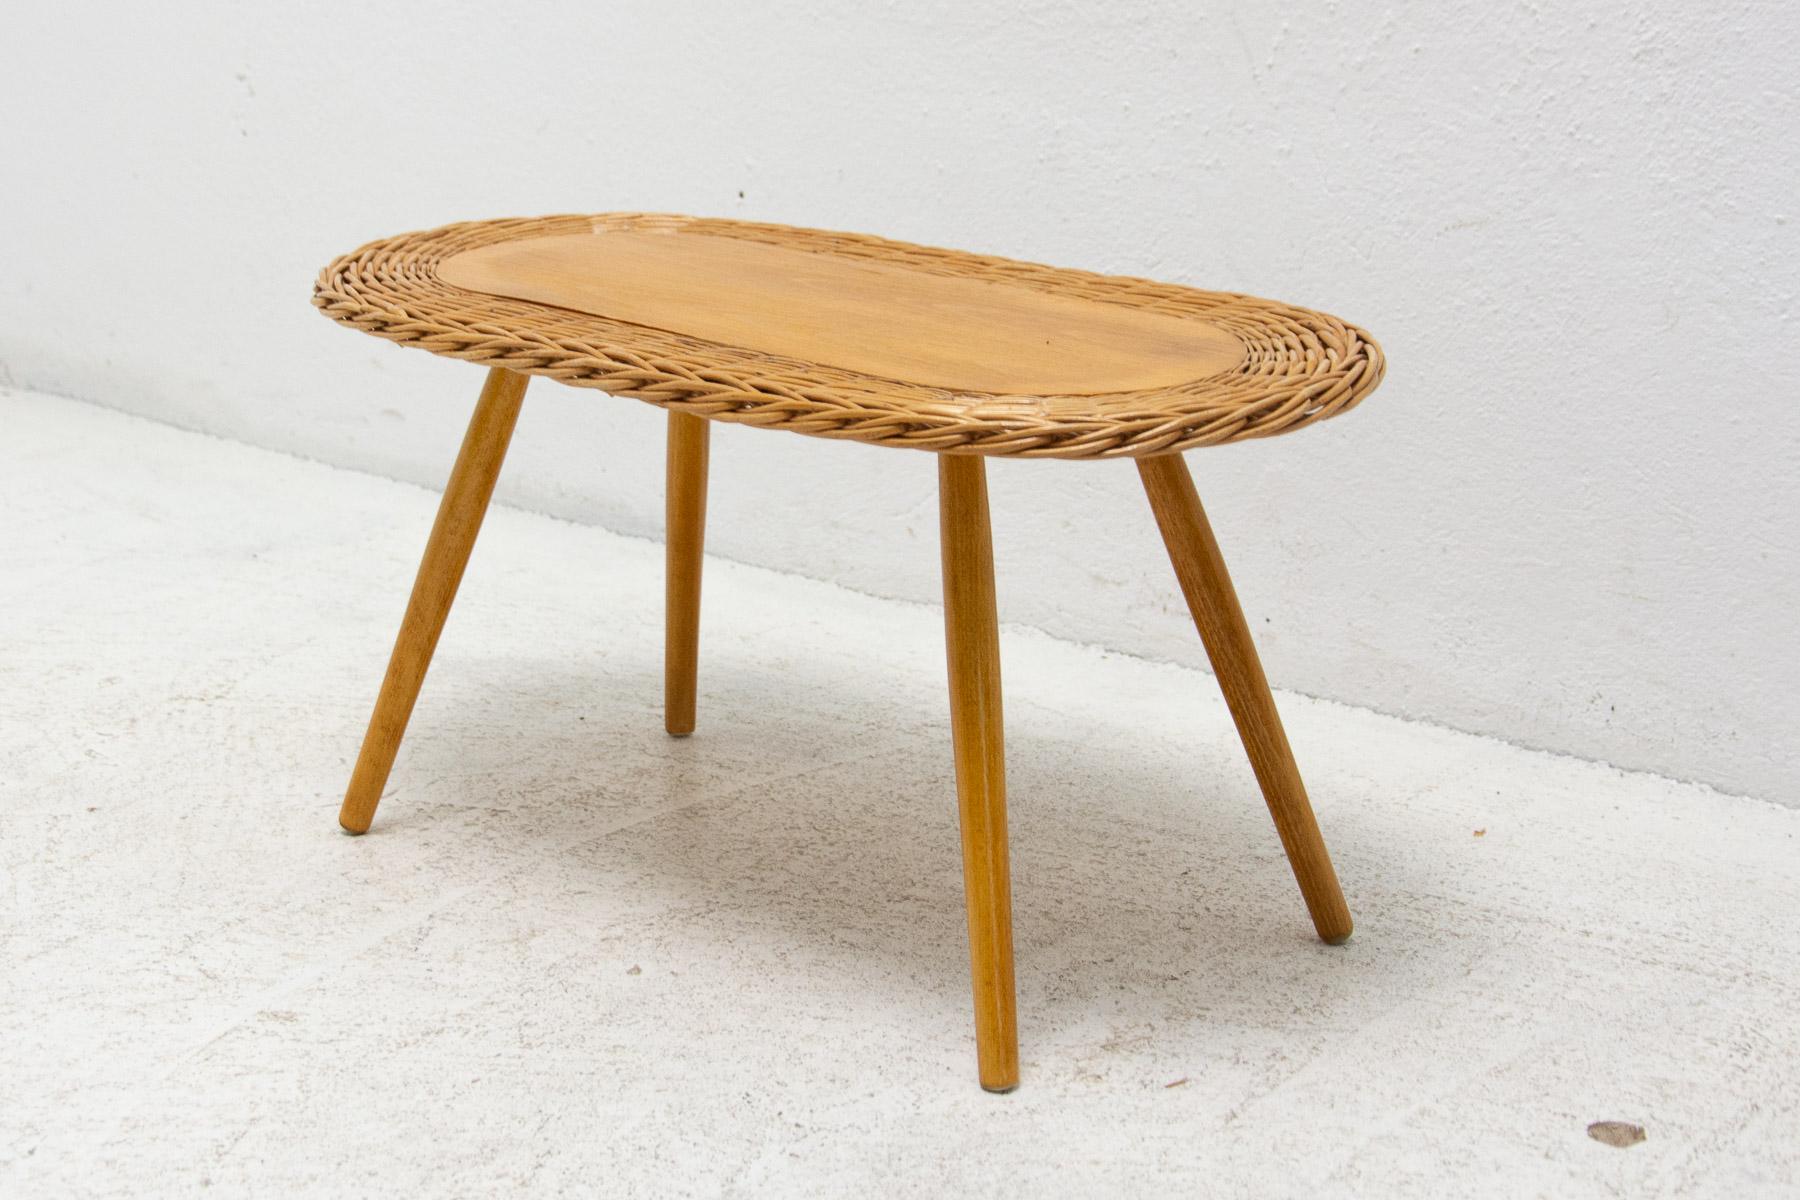 Czechoslovak rattan stool designed by Jan Kalous for ÚLUV in the 1960's. Very simple and elegant design. In good Vintage condition, showing signs of age and using.

Measures: height: 31 cm

width: 63 cm

depth: 32 cm.